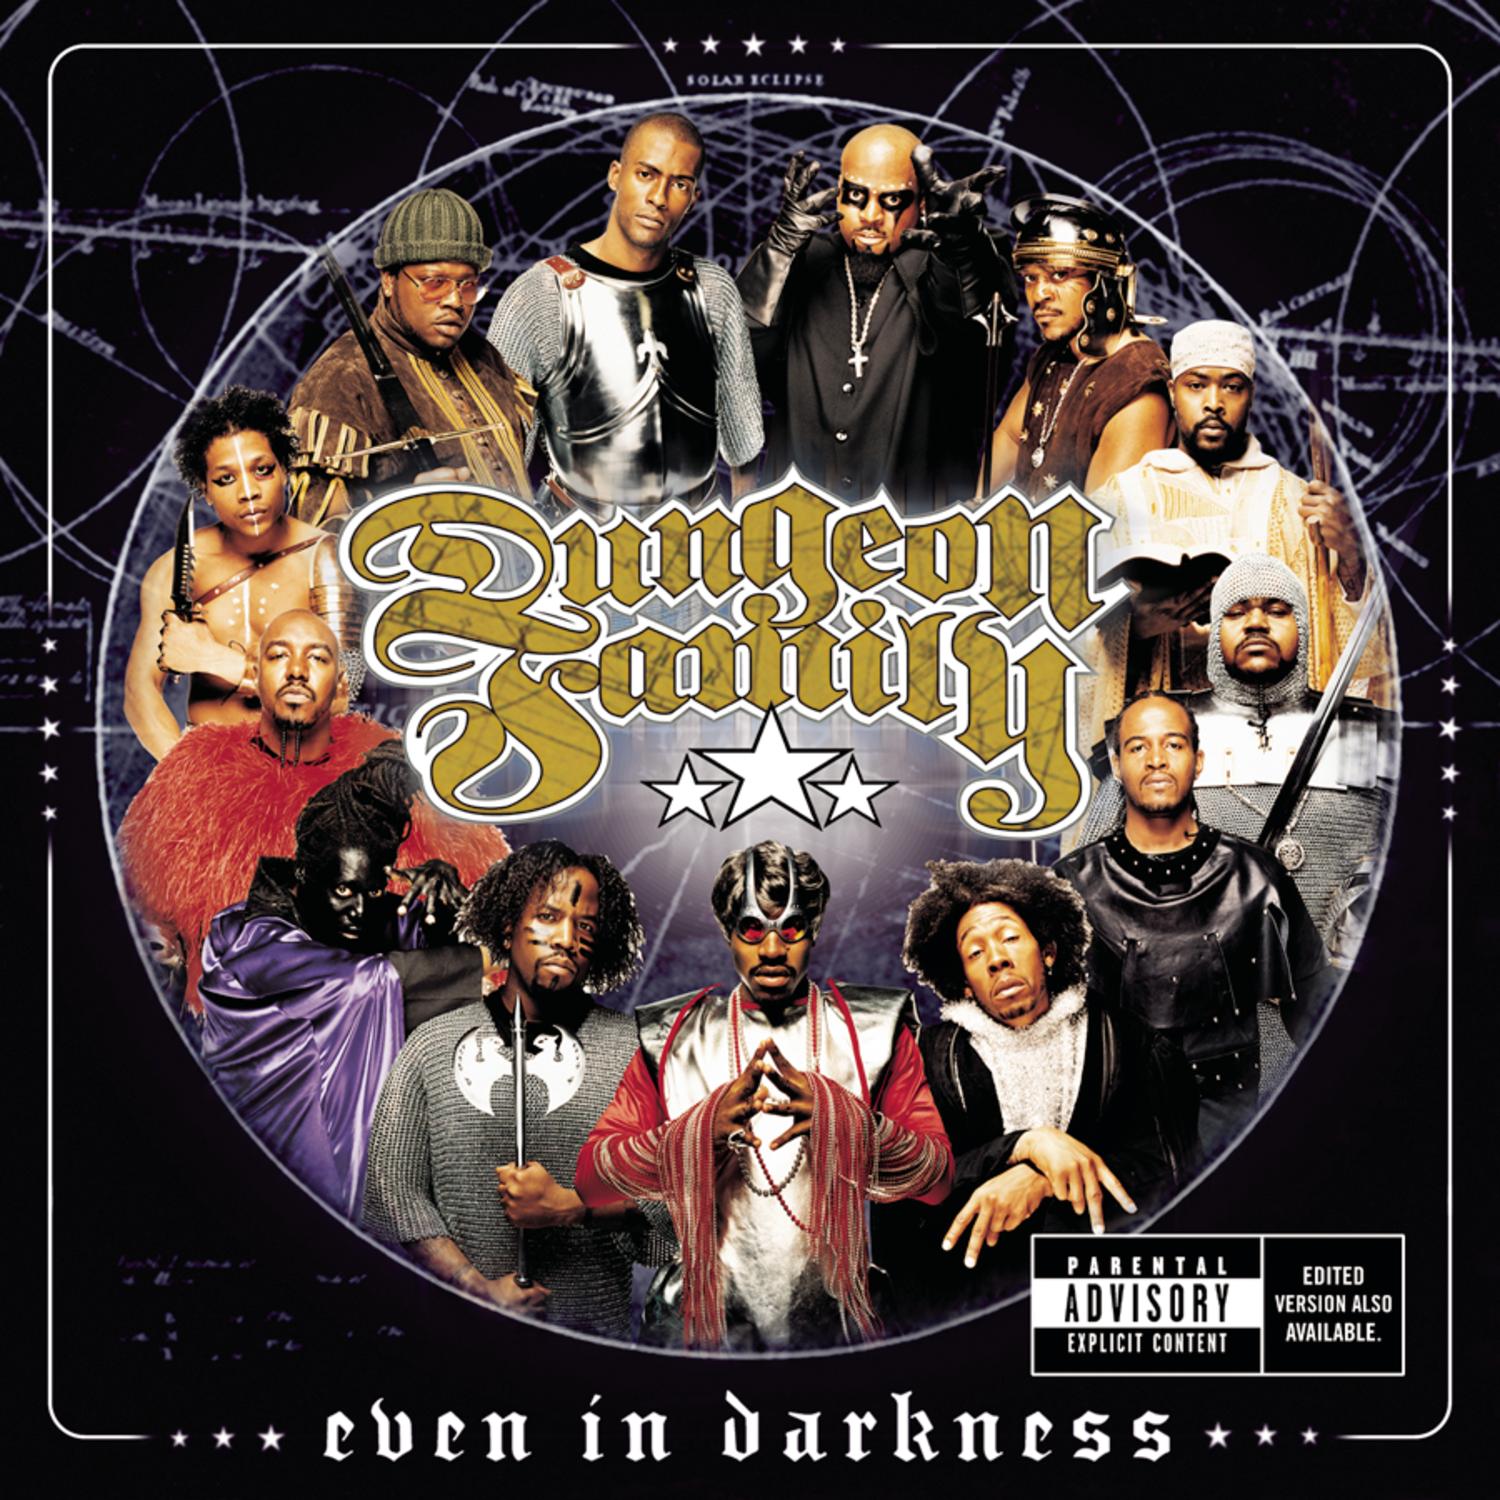 THE DUNGEON FAMILY to Release EVEN IN DARKNESS 15th Anniversary Vinyl & Reunite At One MusicFest